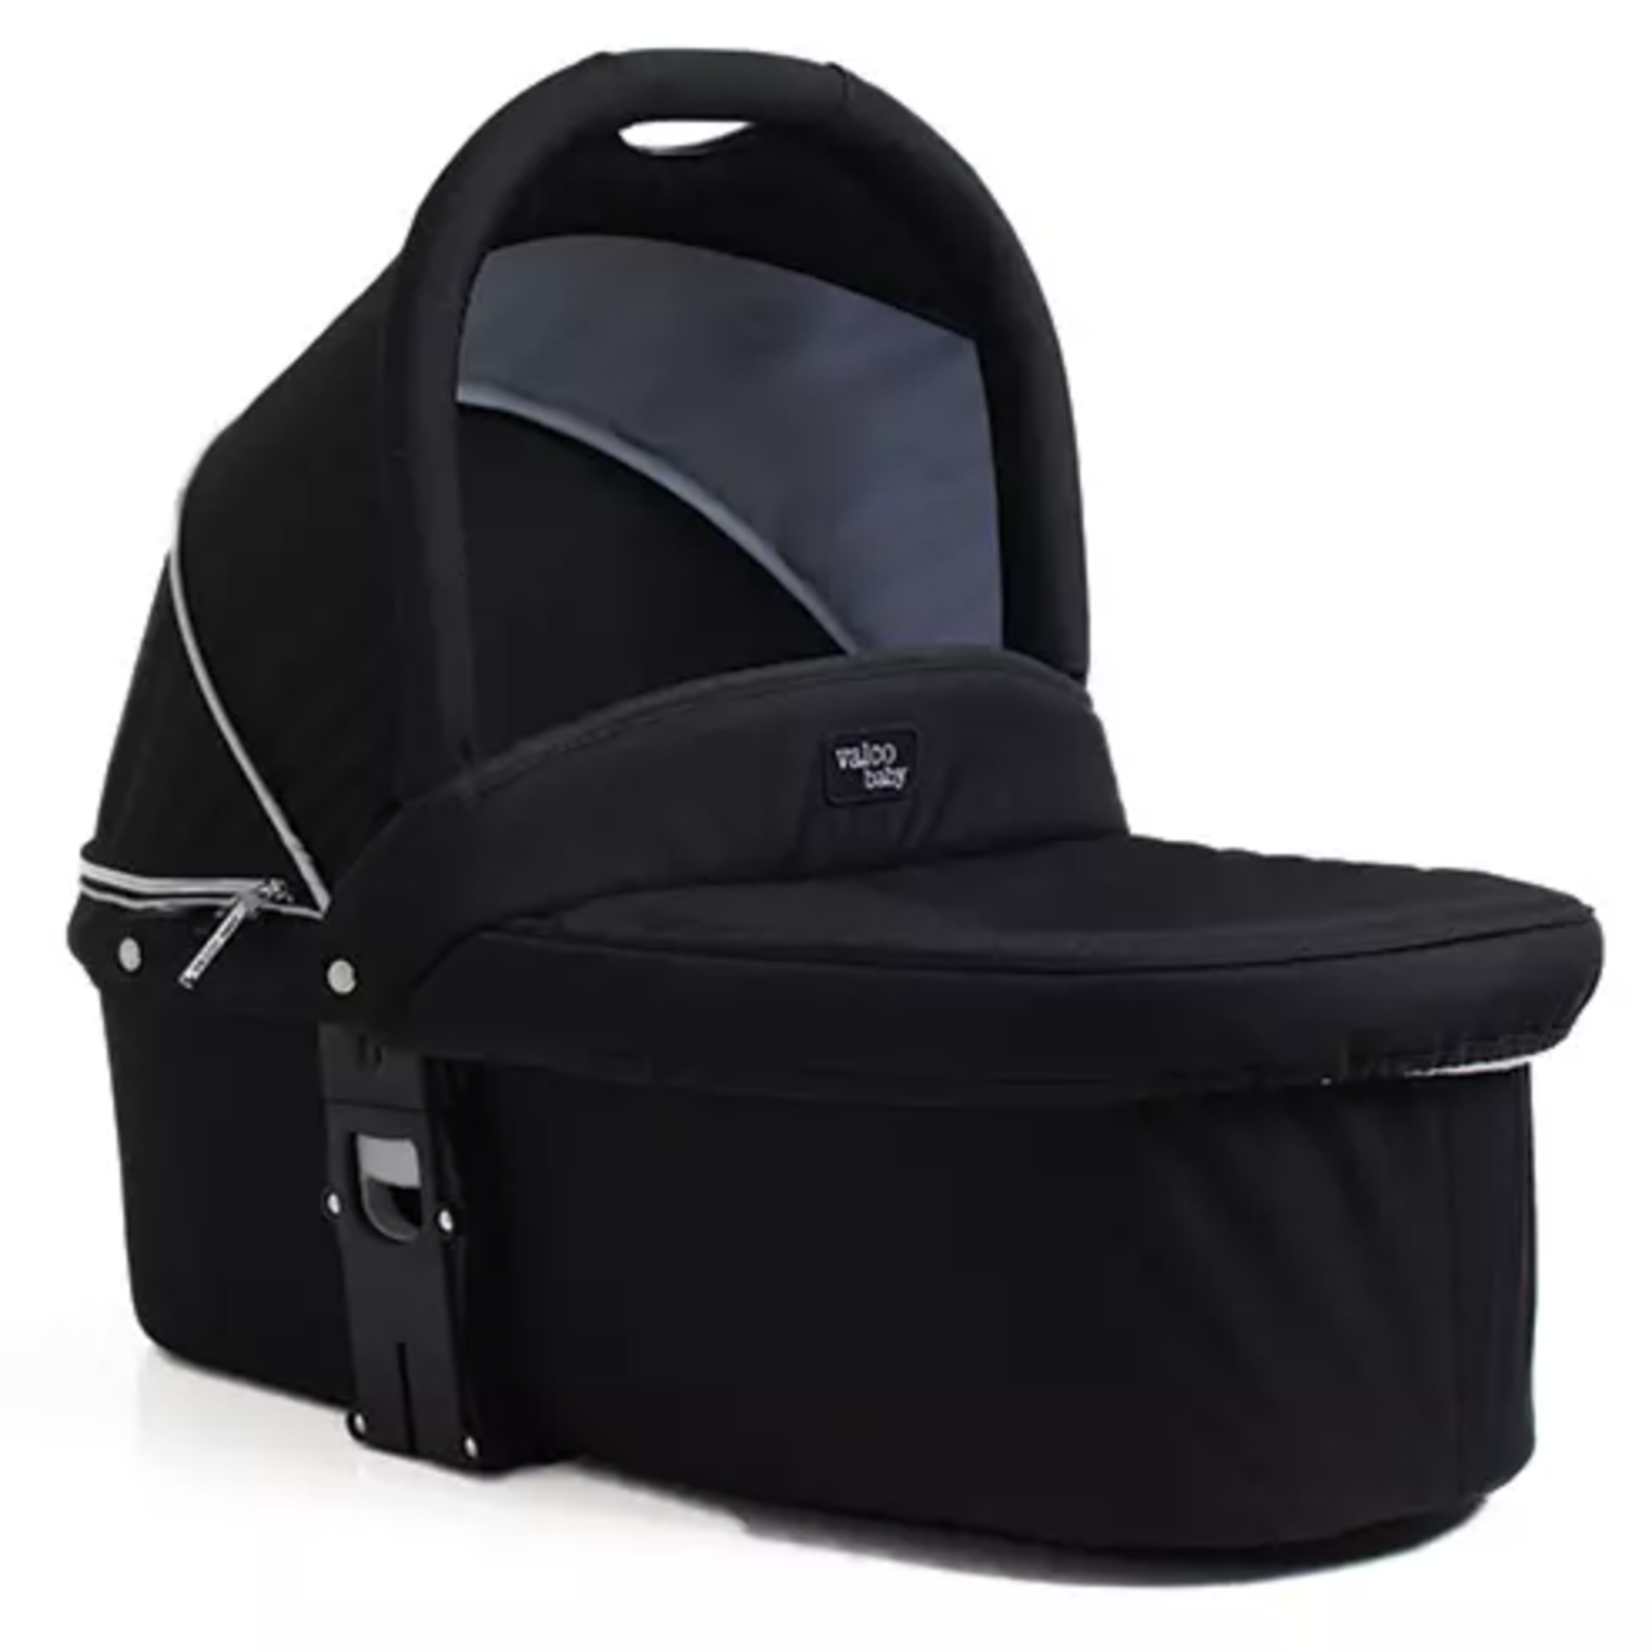 Valco Baby Q Bassinet for Snap Ultra Duo-Coal Black(N9694)